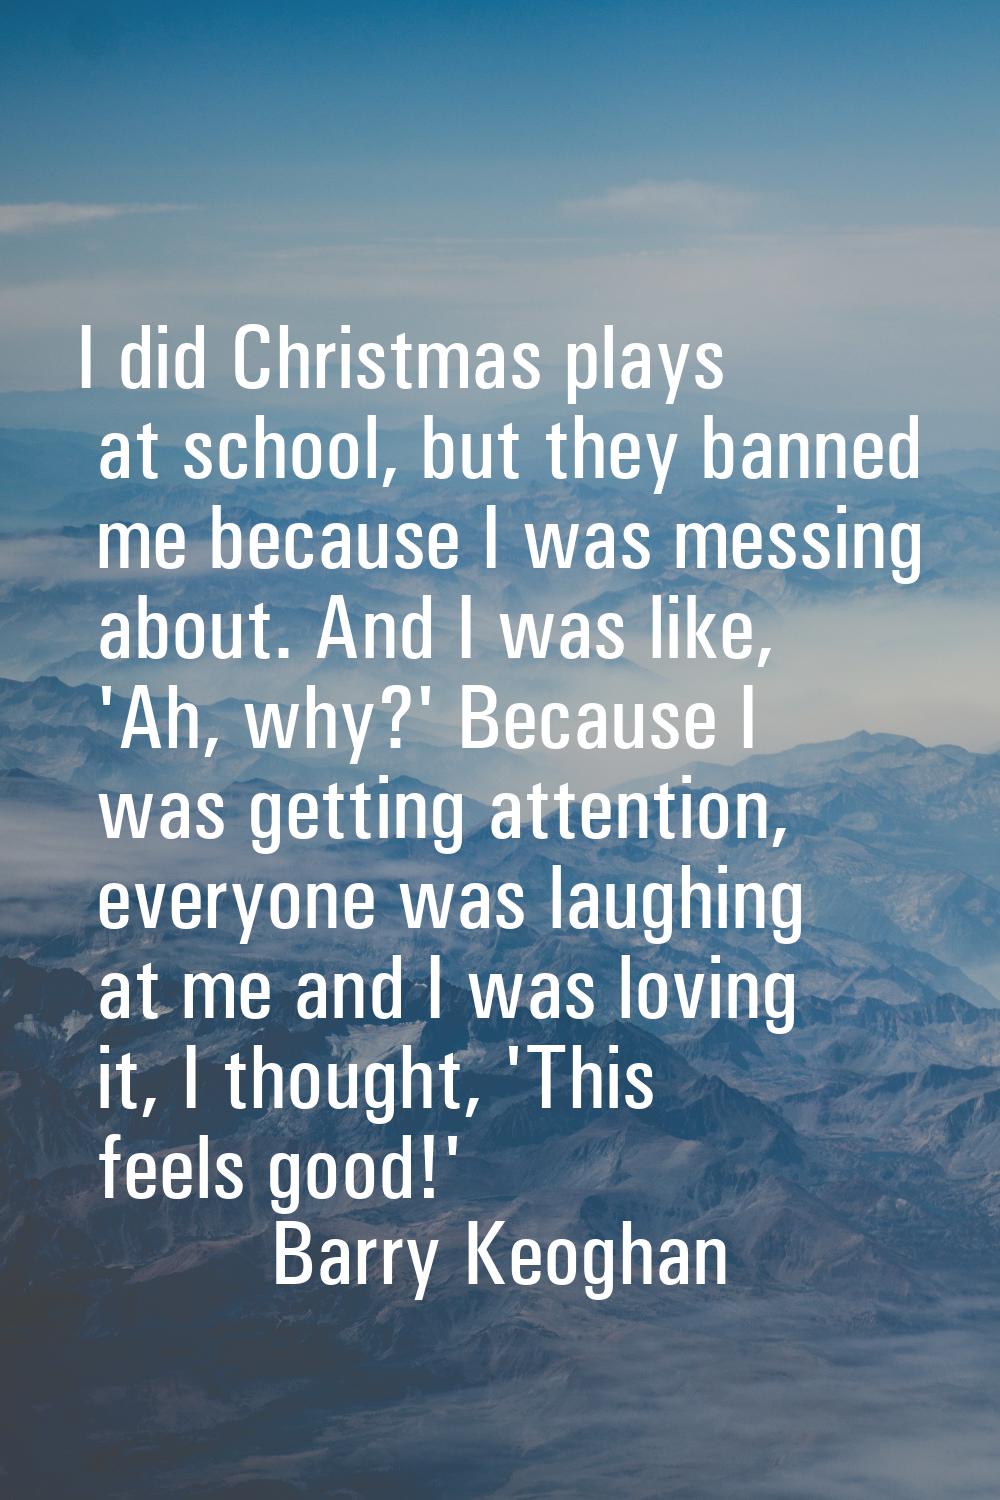 I did Christmas plays at school, but they banned me because I was messing about. And I was like, 'A